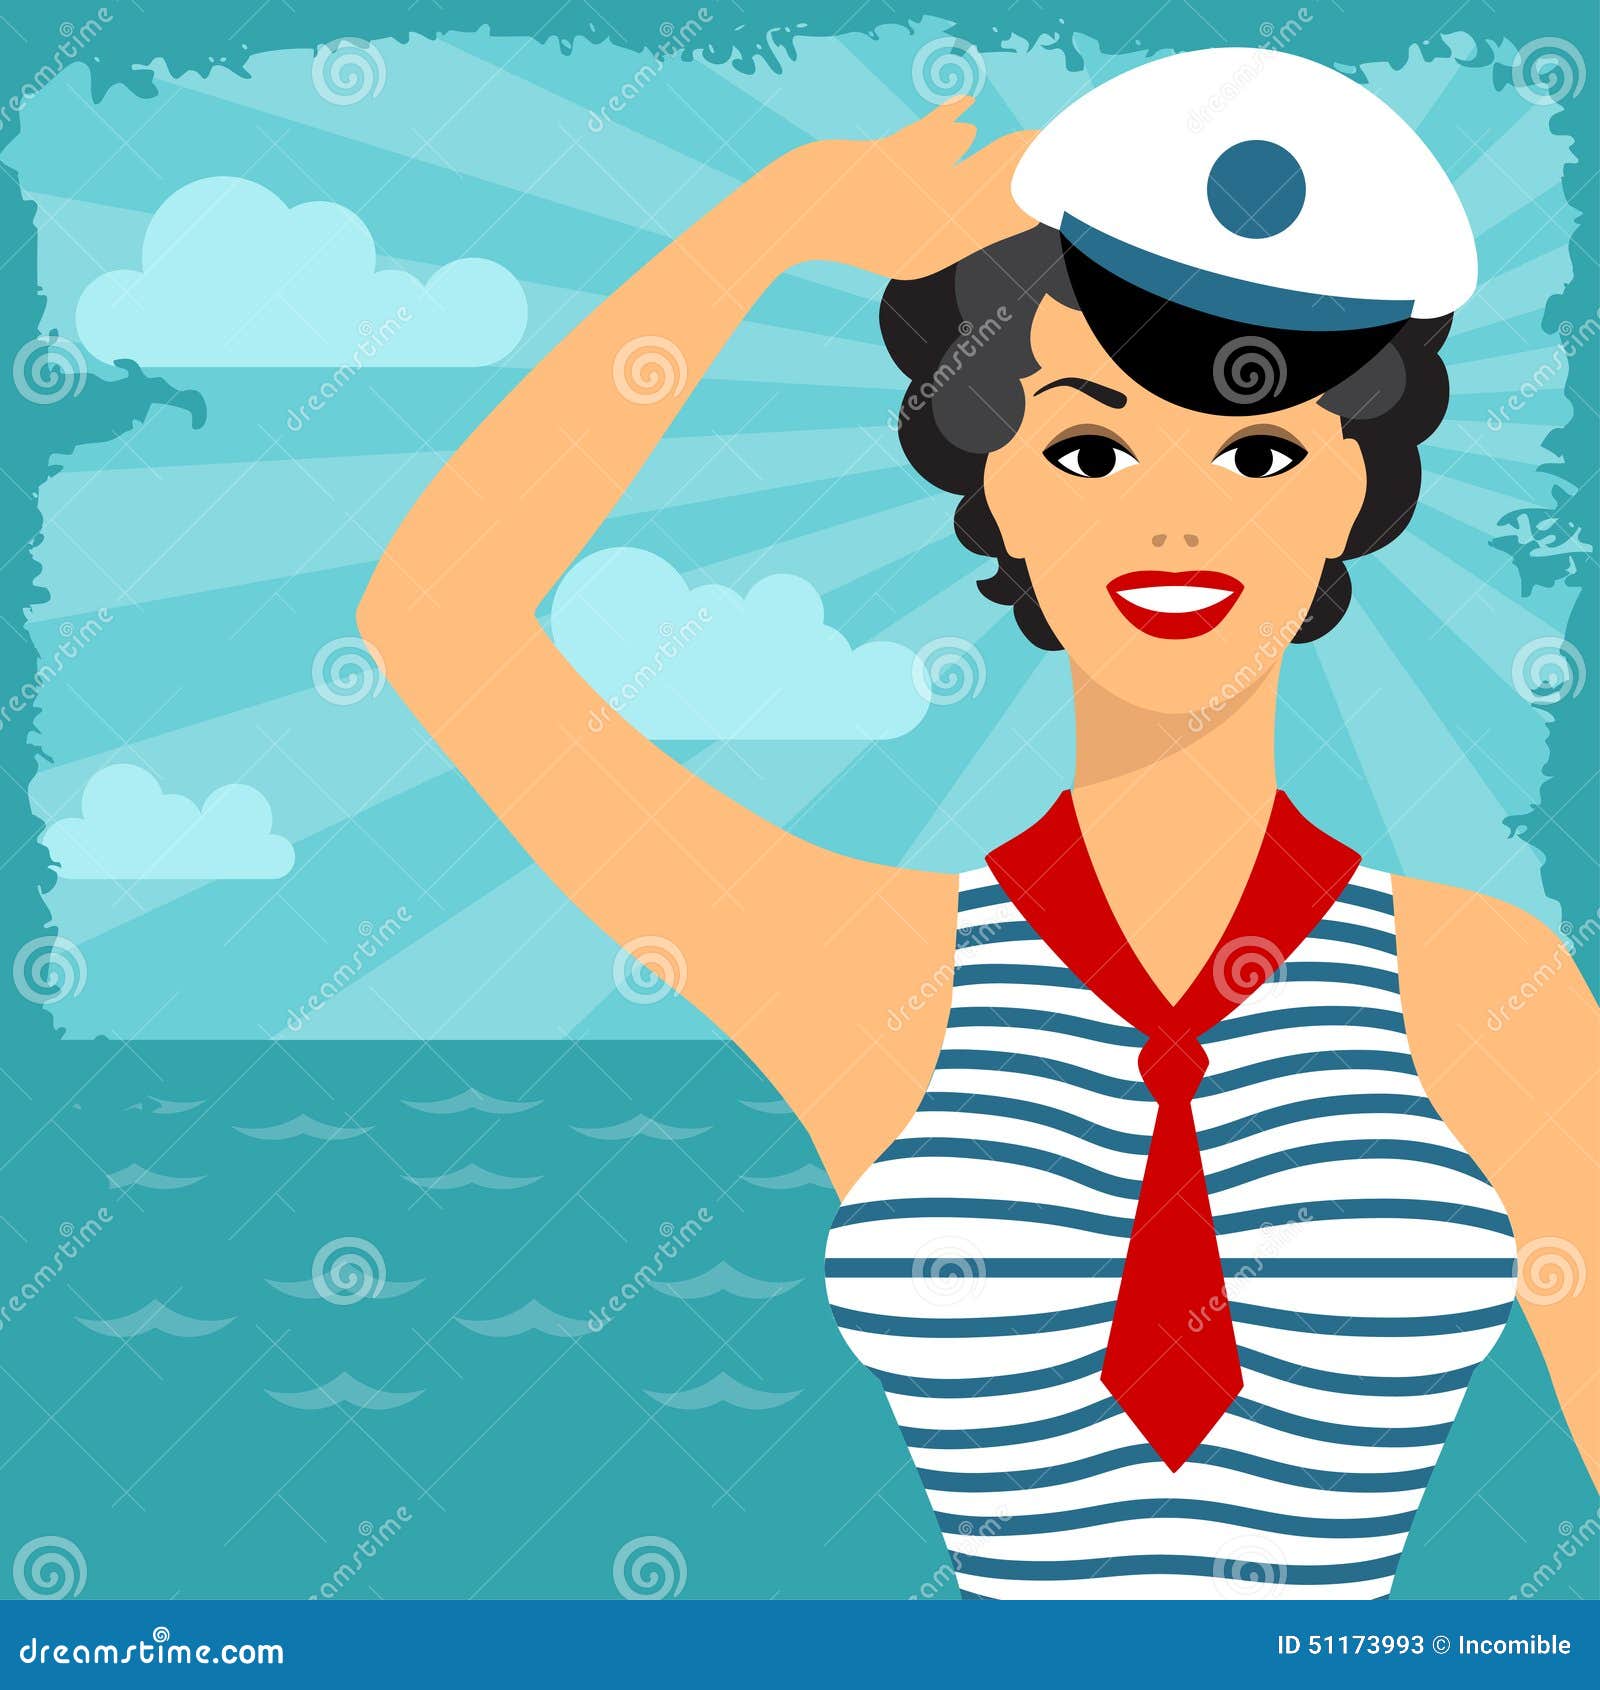 Card With Beautiful Pin Up Sailor Girl 1950s Style Stock Vector